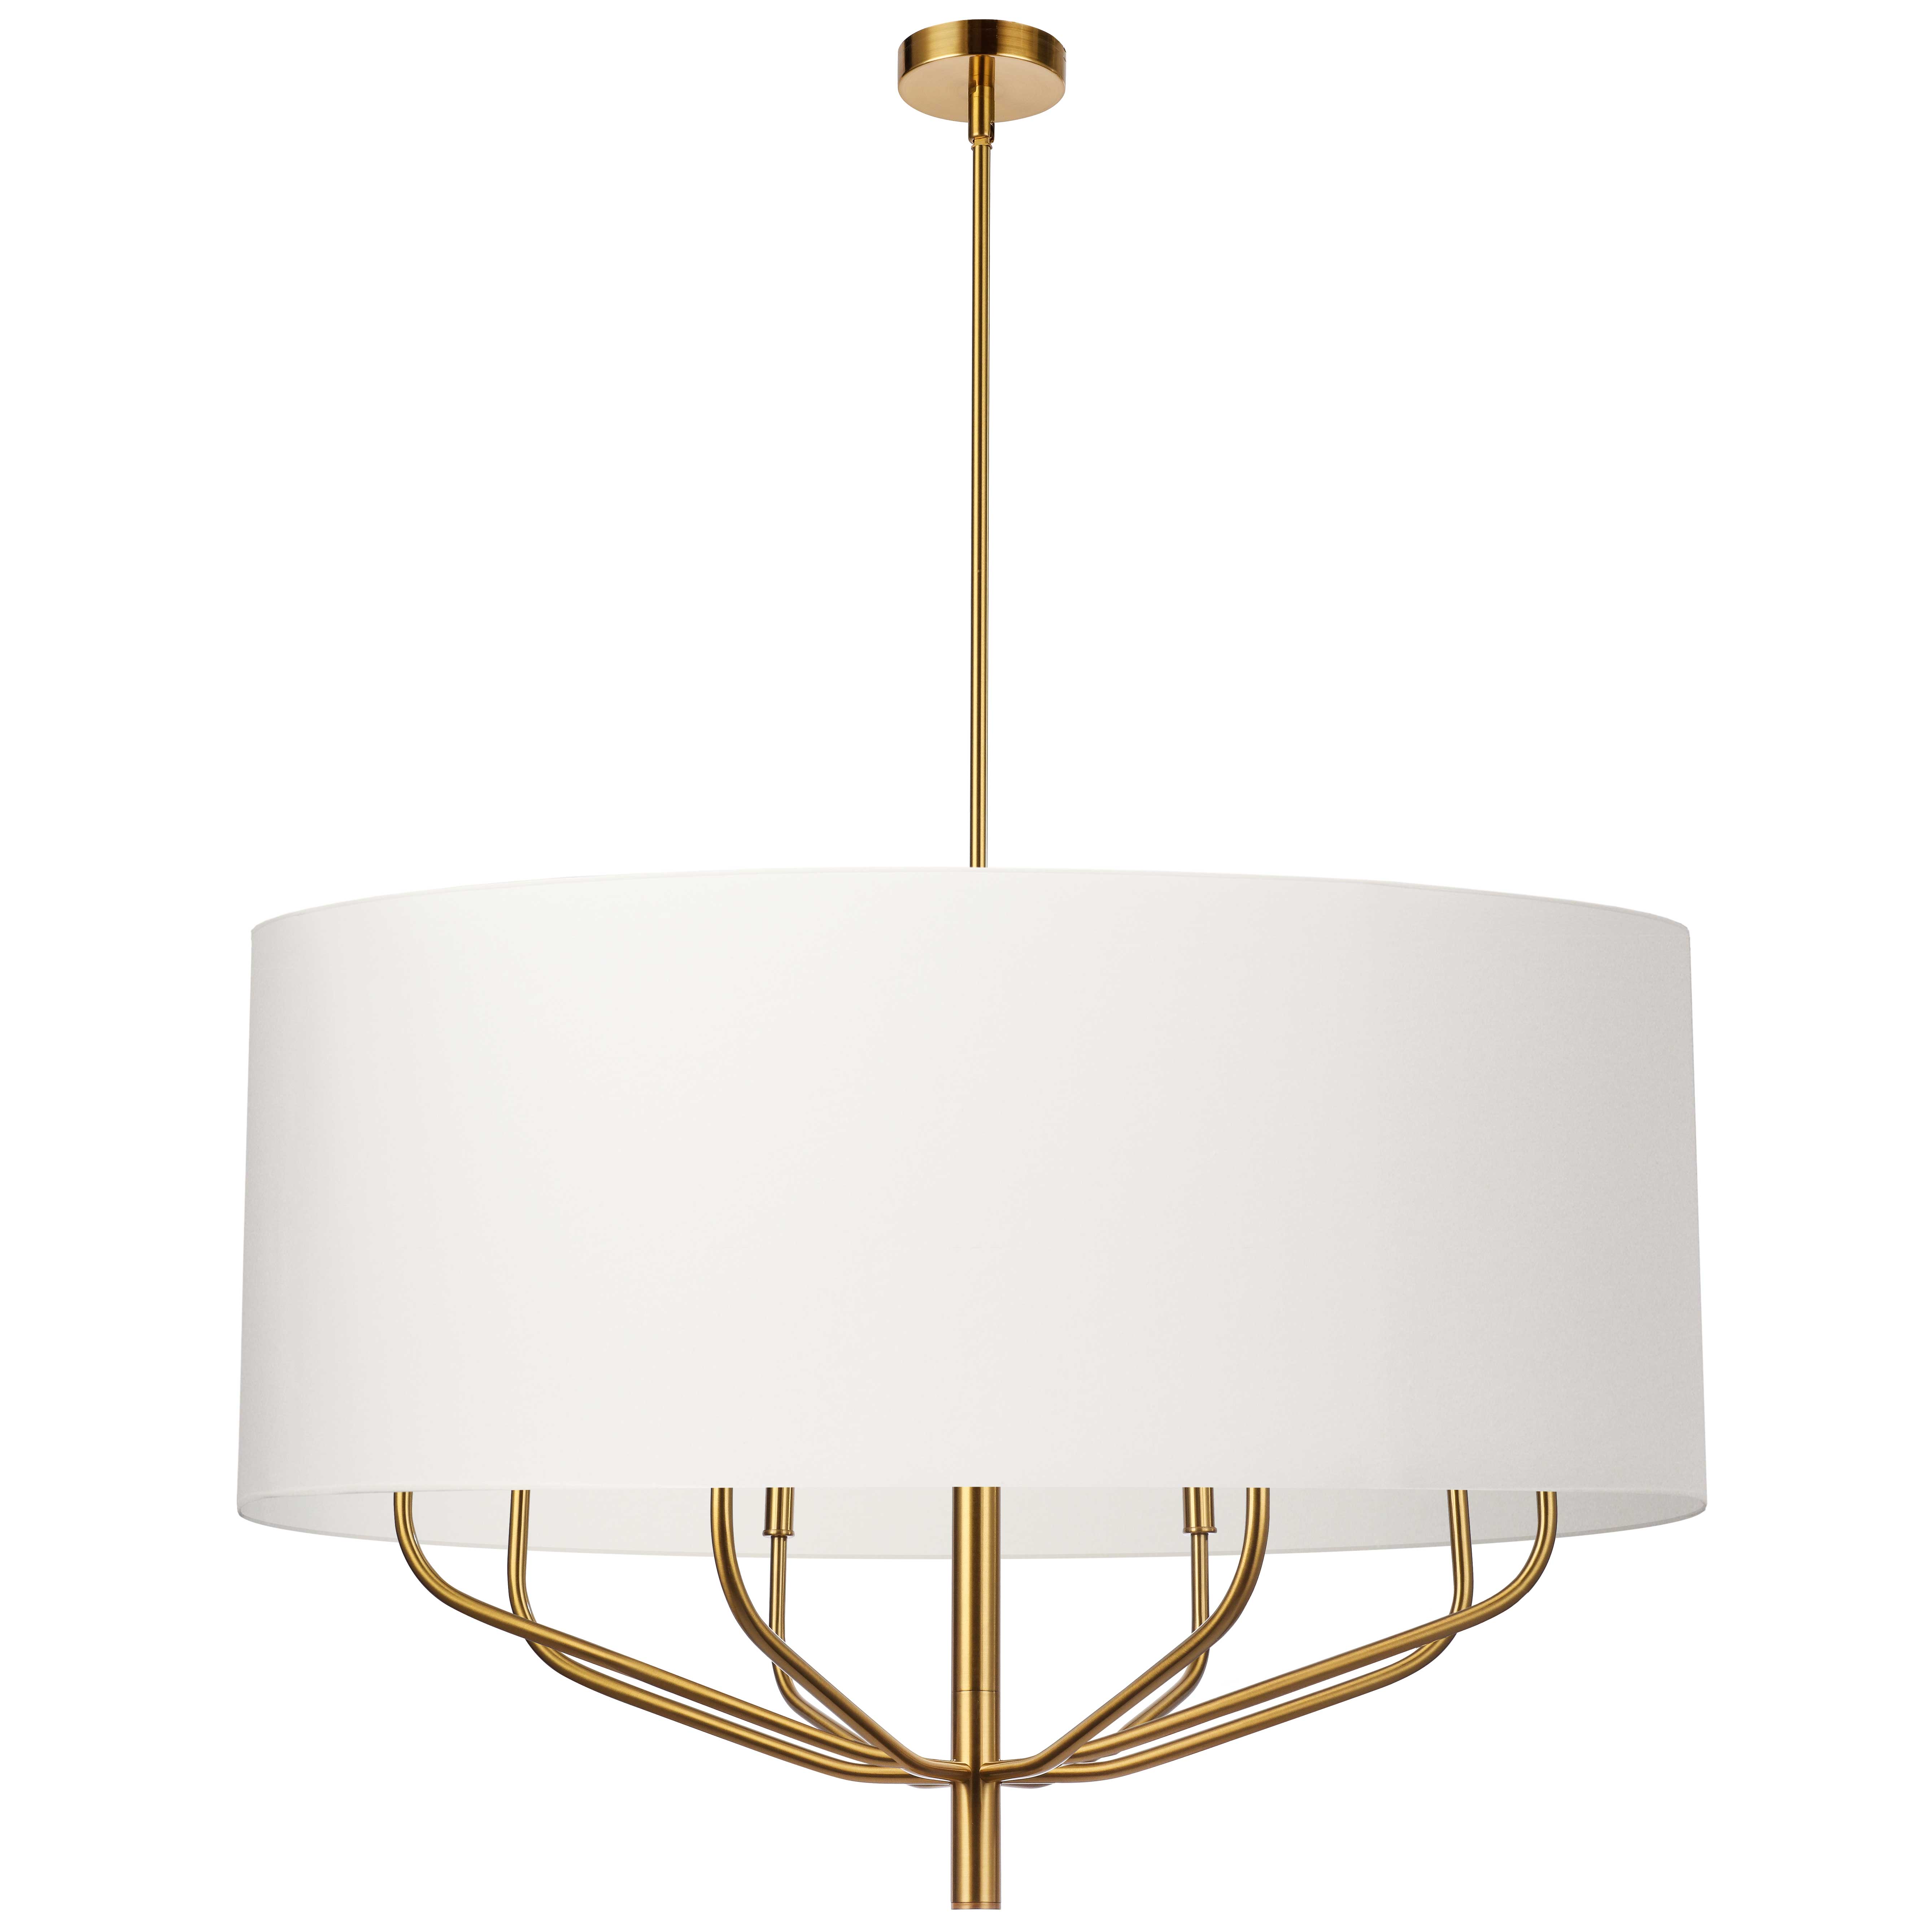 Using a simple idea based on traditional chandelier designs, the Eleanor family of lighting exudes luxury and refined style. It's available in configurations to suit larger or smaller spaces.  The metal frame in a choice of finish features a strong vertical drop, with arms that curve gracefully upwards in one or two tiers. An optional fabric shade encompasses the silhouette while diffusing the light to a softer glow.  Elegant and striking in its effect, Eleanor lighting will enhance the main rooms of your home, including living and dining rooms, or a main foyer area.